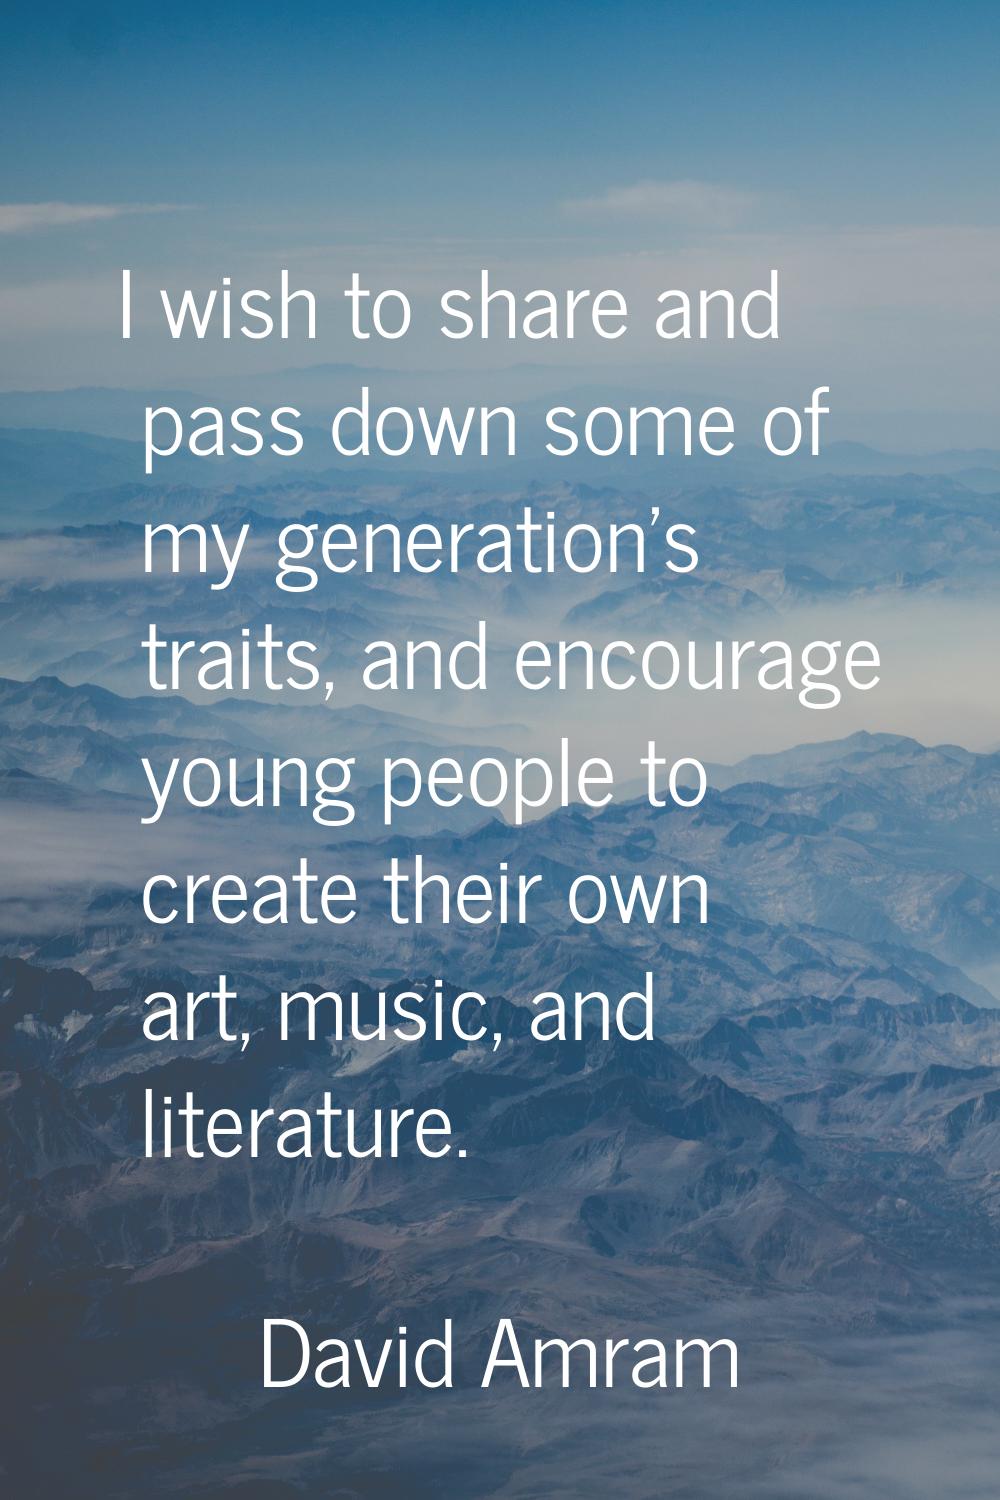 I wish to share and pass down some of my generation's traits, and encourage young people to create 